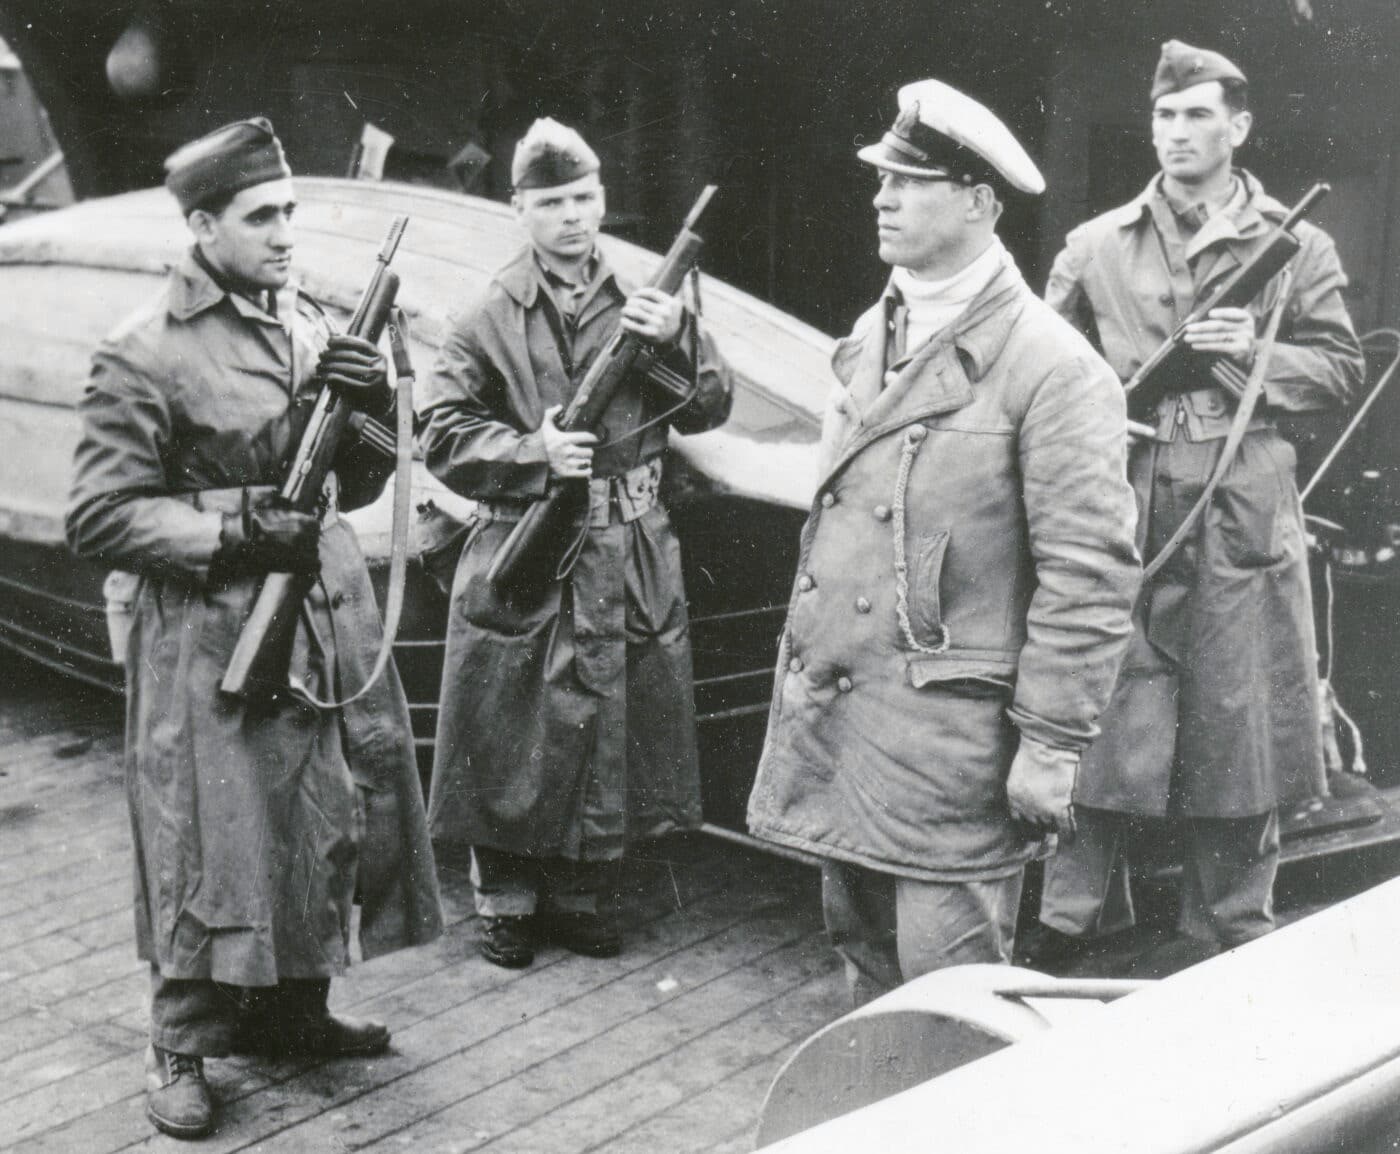 US Marine guards armed with Reising Model 50 SMGs guard U-234’s Captain Fehler